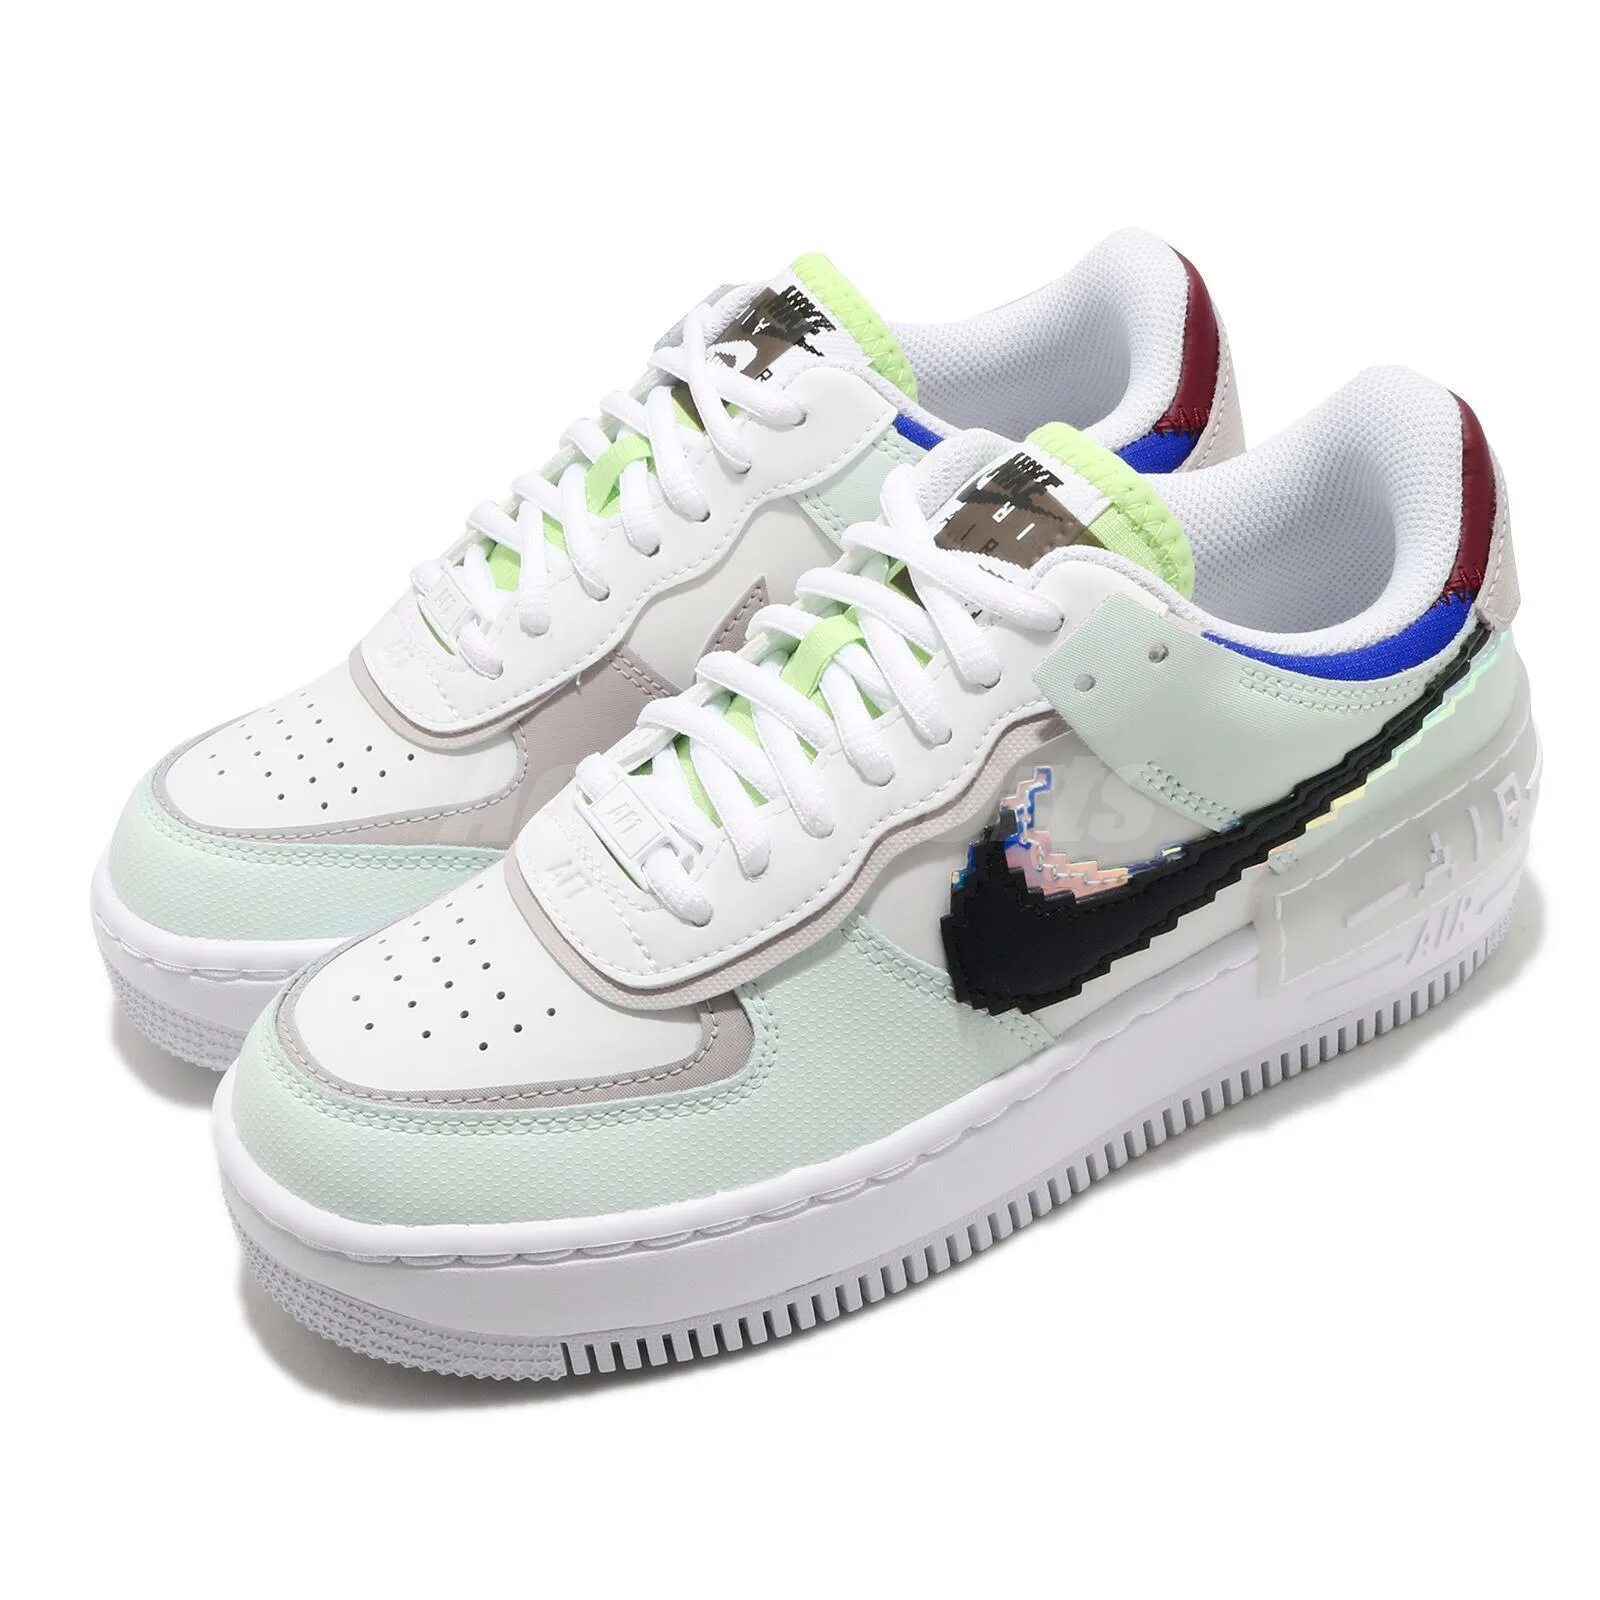 Nike Wmns Air Force 1 Pixel. Nike Wmns Air Force 1. Nike Air Force 1 Shadow Wmns. Nike af1 Shadow se.